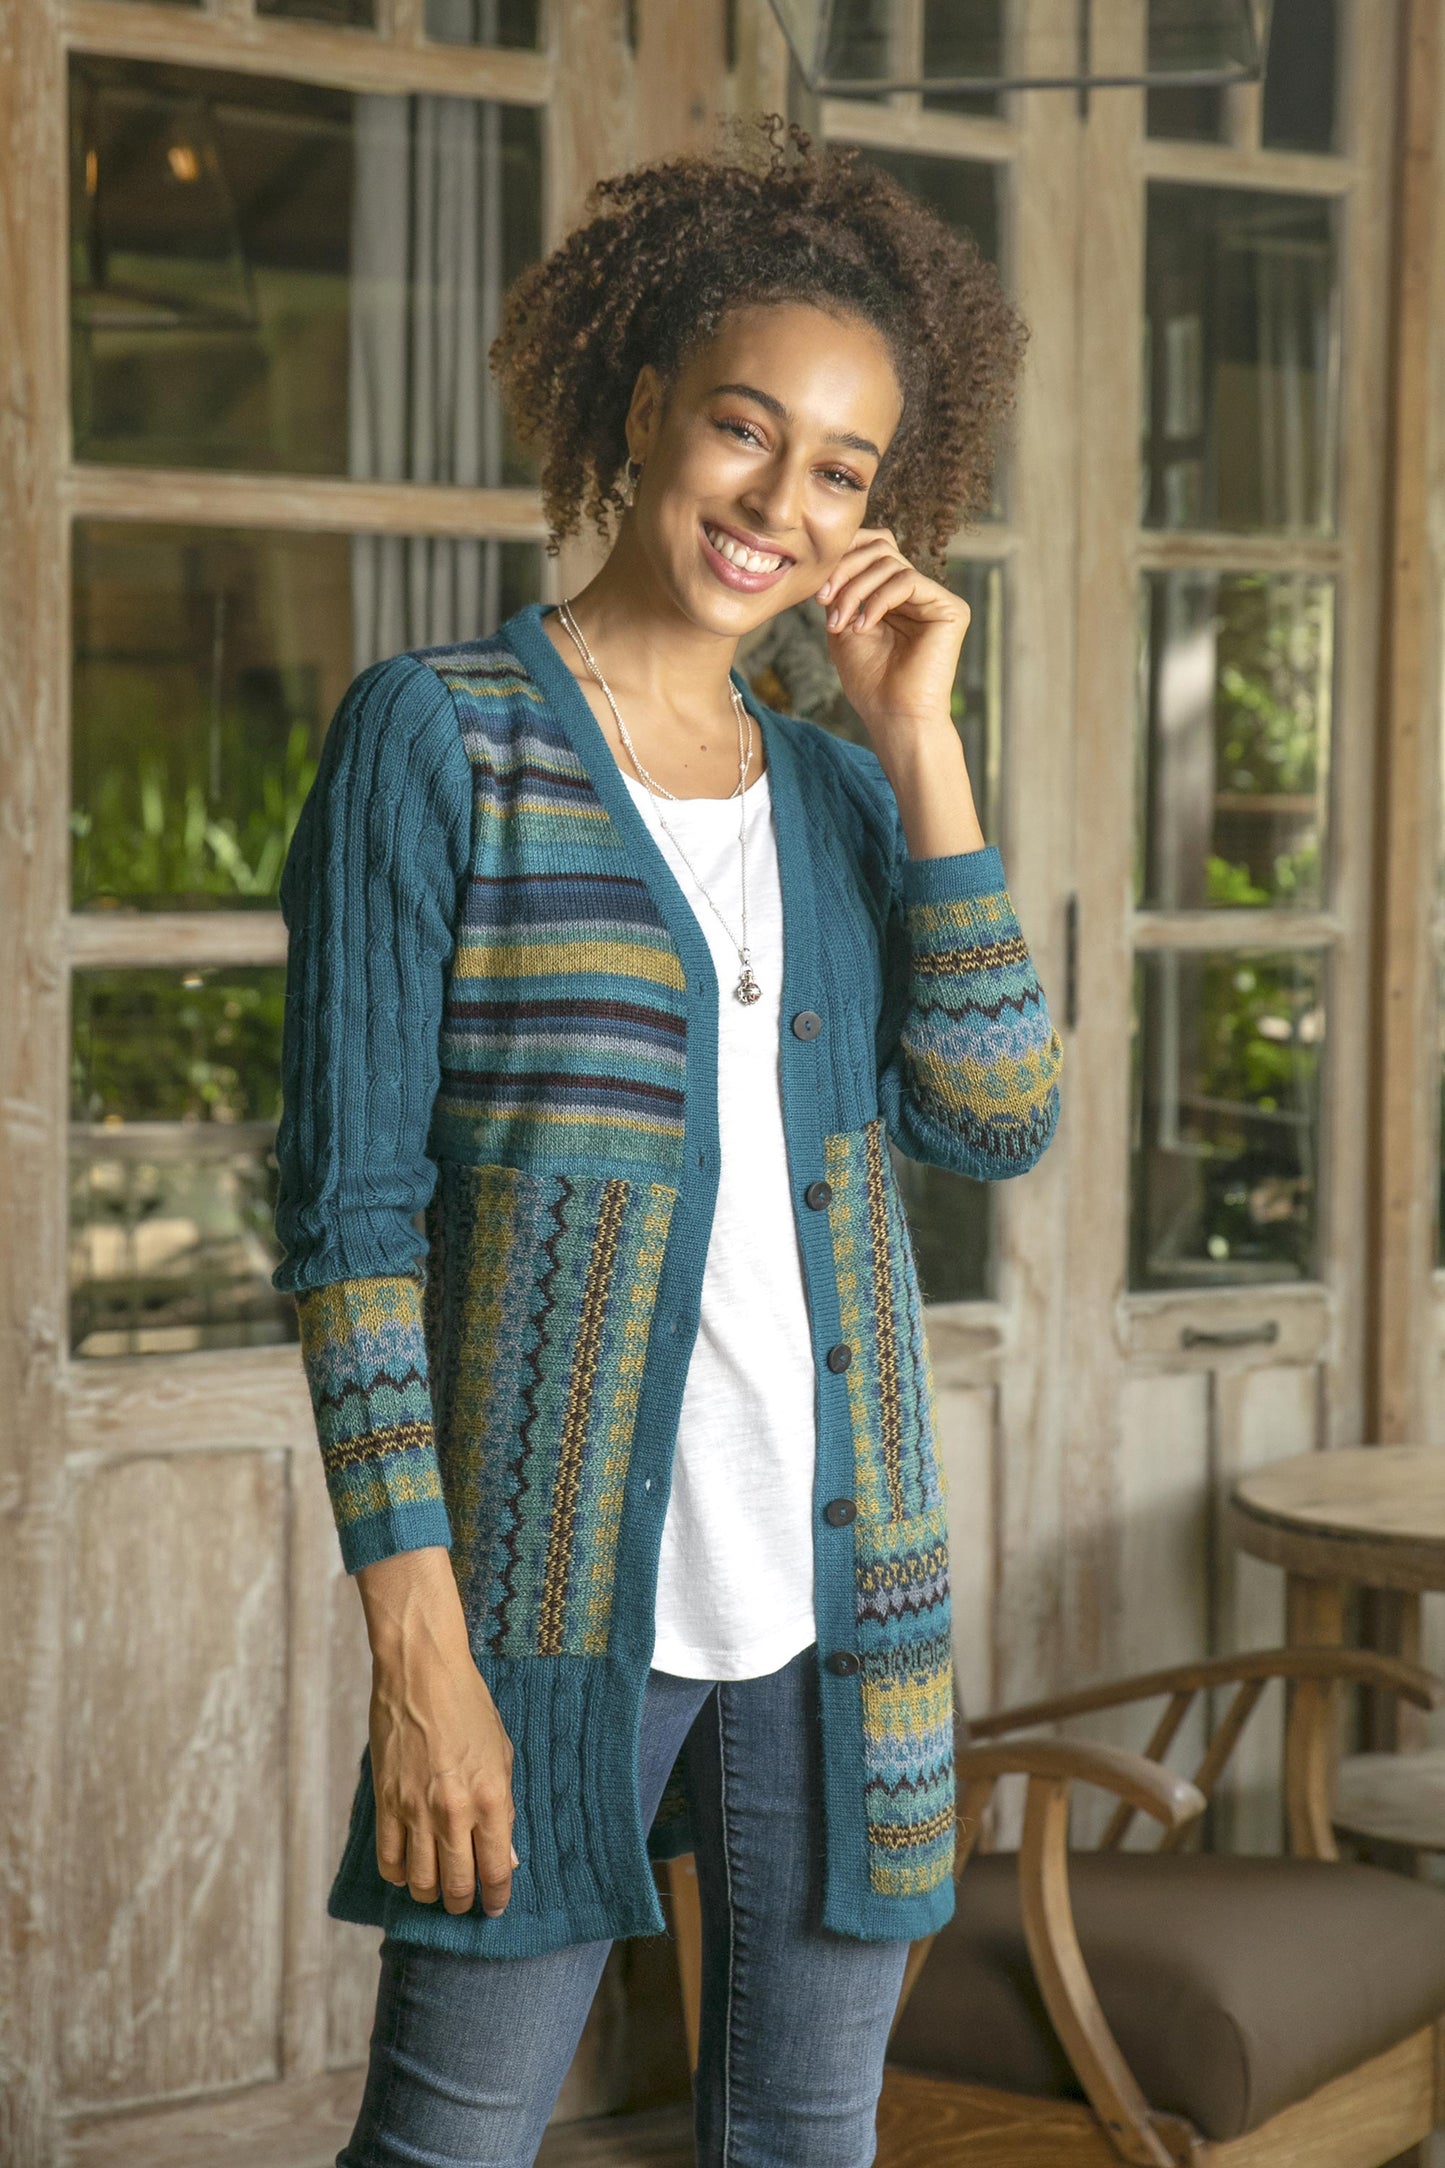 Patchwork in Teal Cable Knit 100% Alpaca Cardigan in Teal from Peru